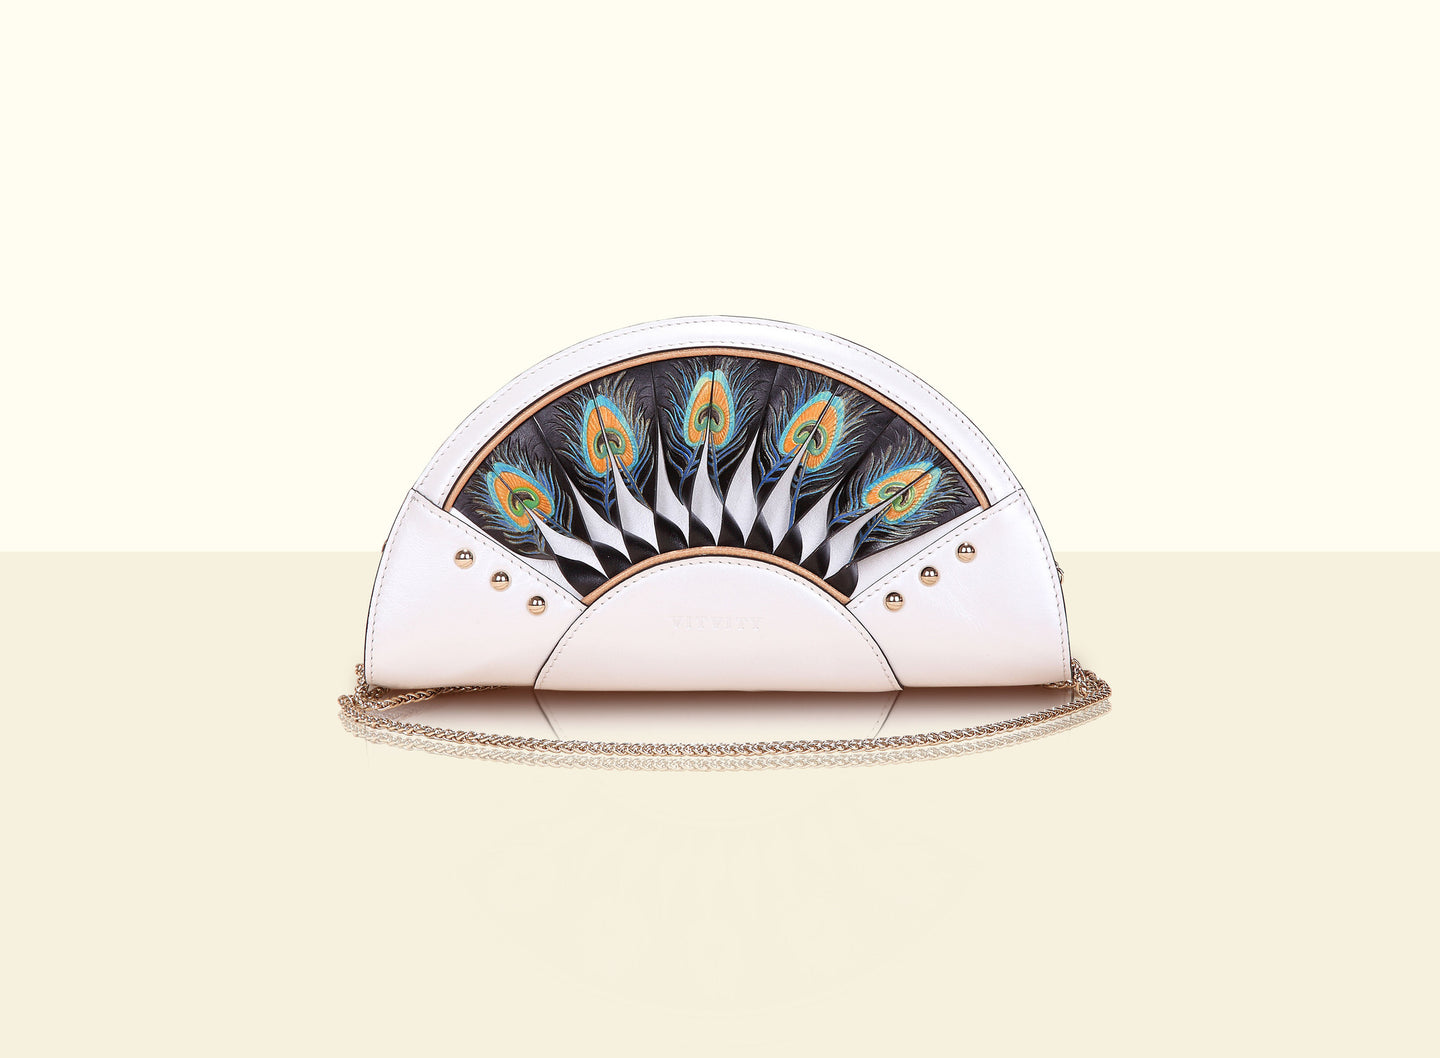 Exquisite Fan Clutch - Pearl White and Black